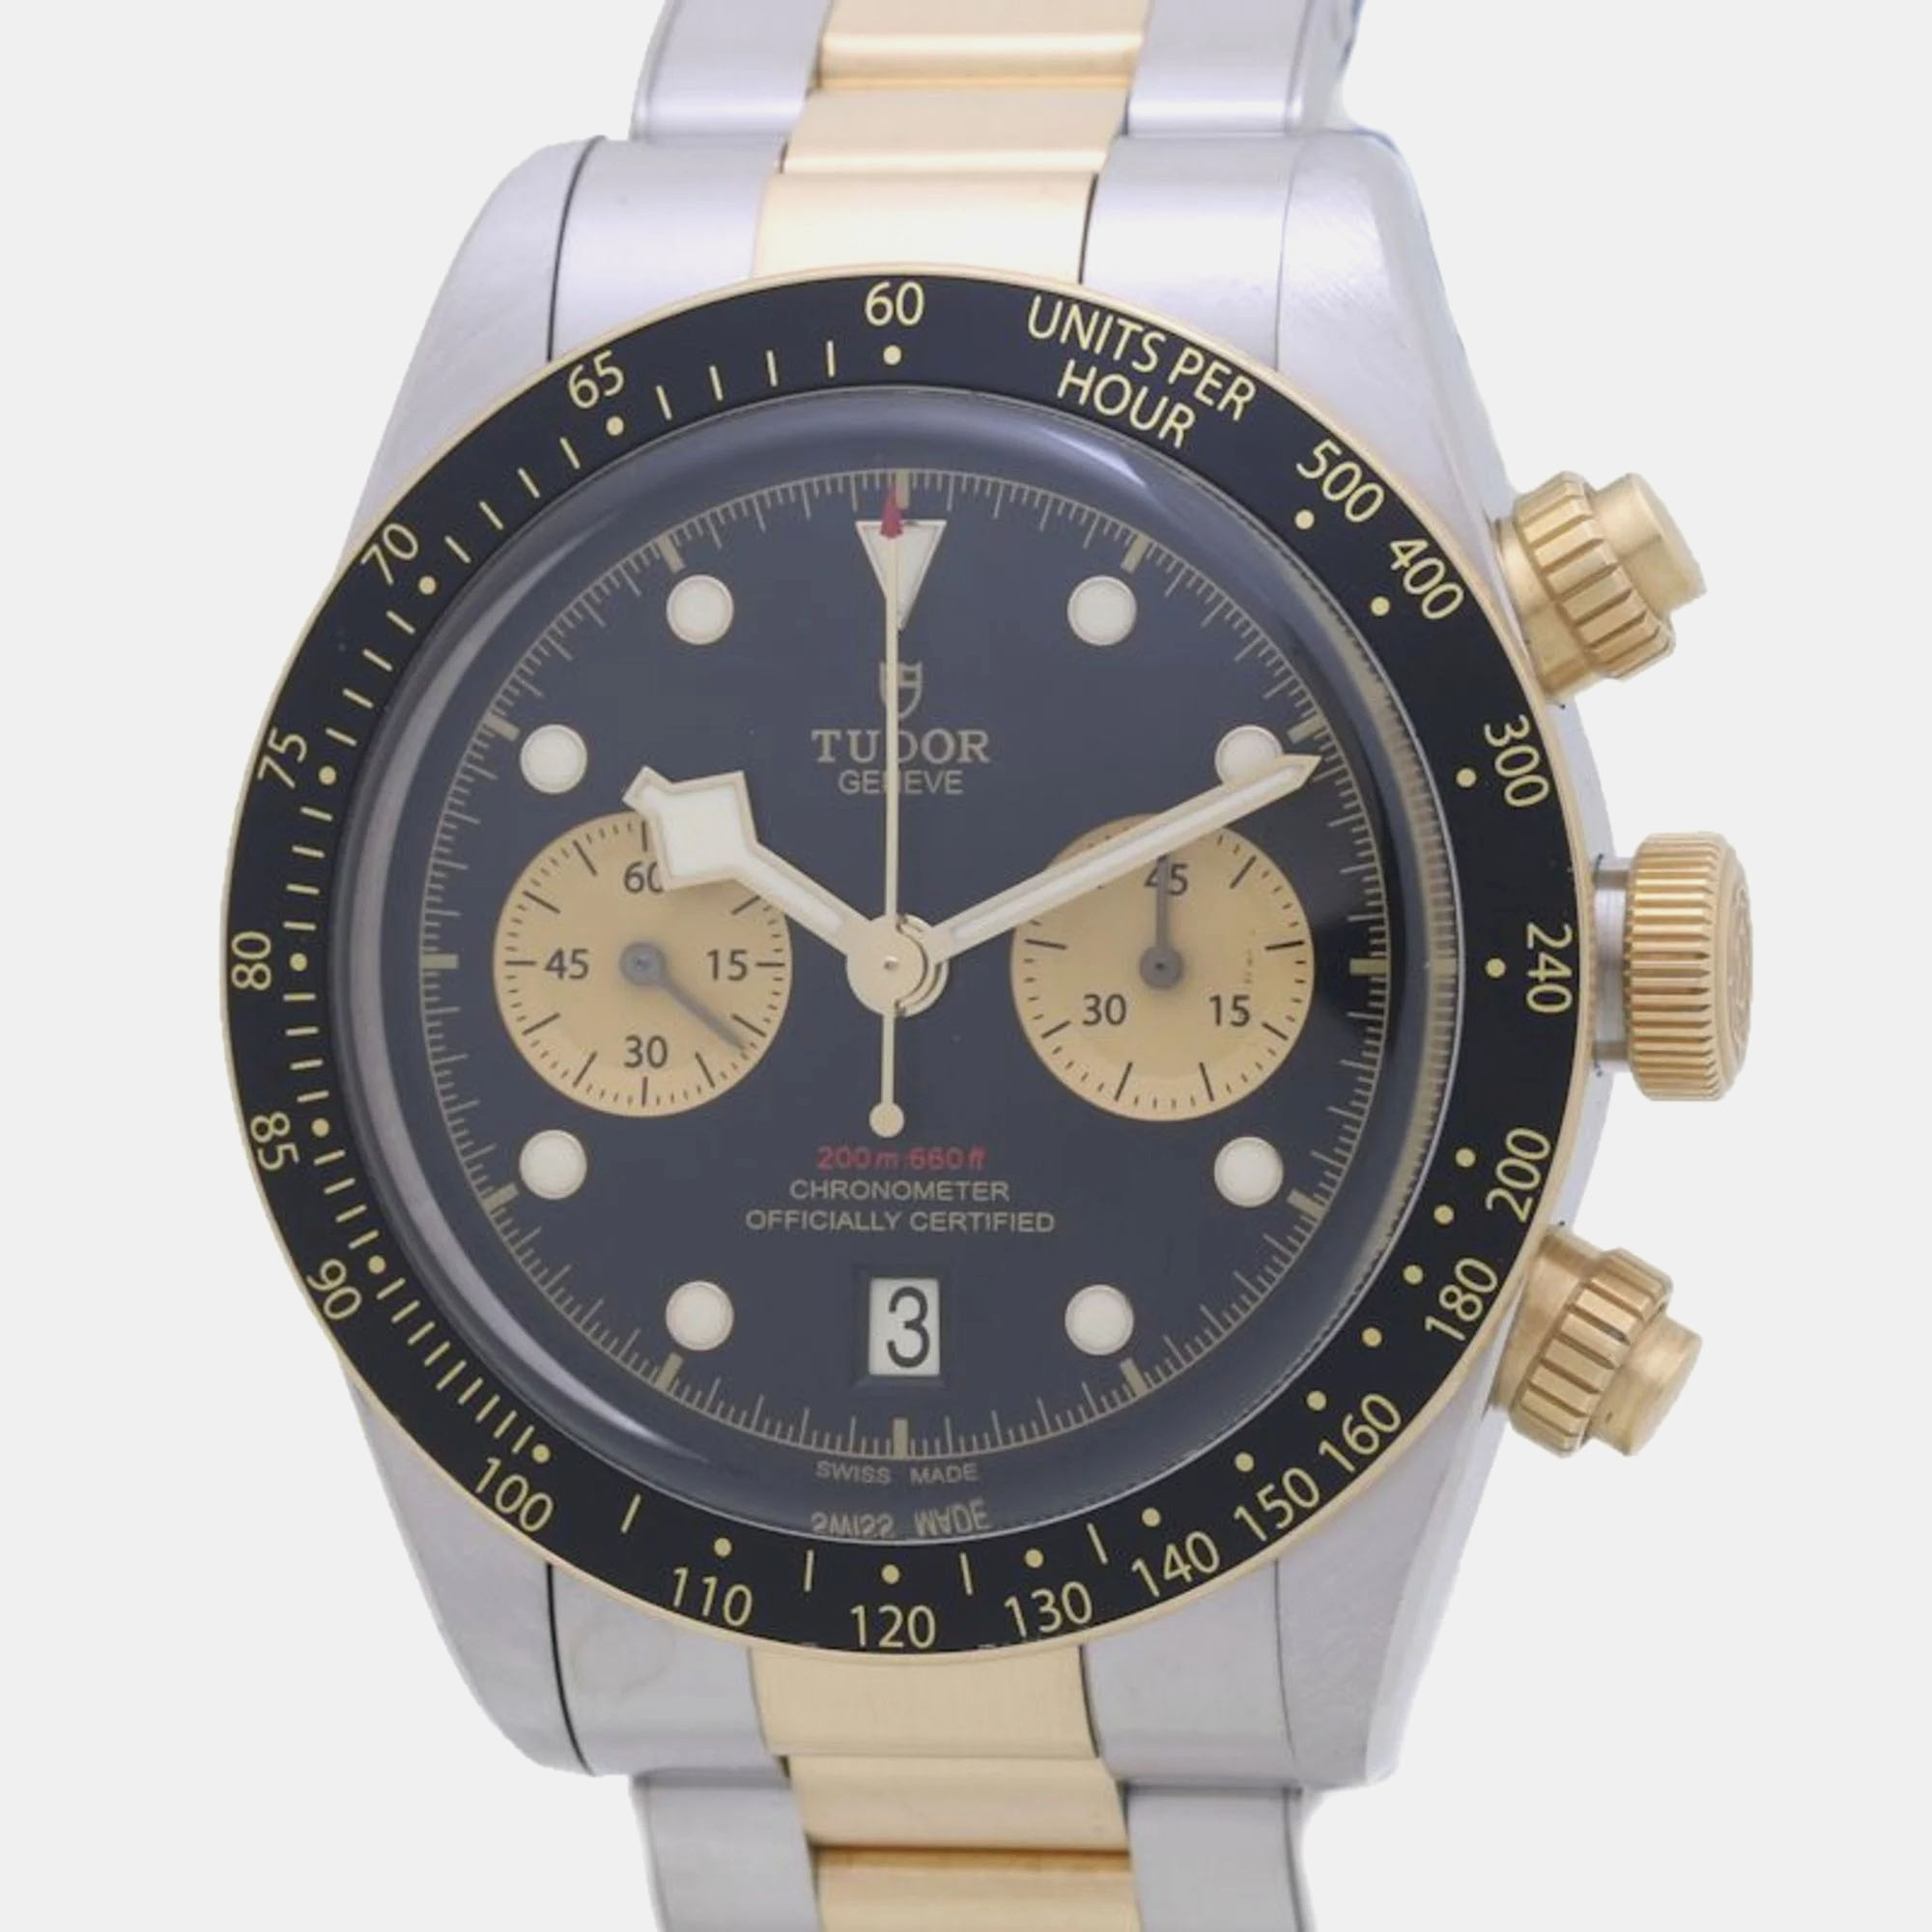 A meticulously crafted watch holds the promise of enduring appeal all day comfort and investment value. Carefully assembled and finished to stand out on your wrist this Tudor timepiece is a purchase you will cherish.